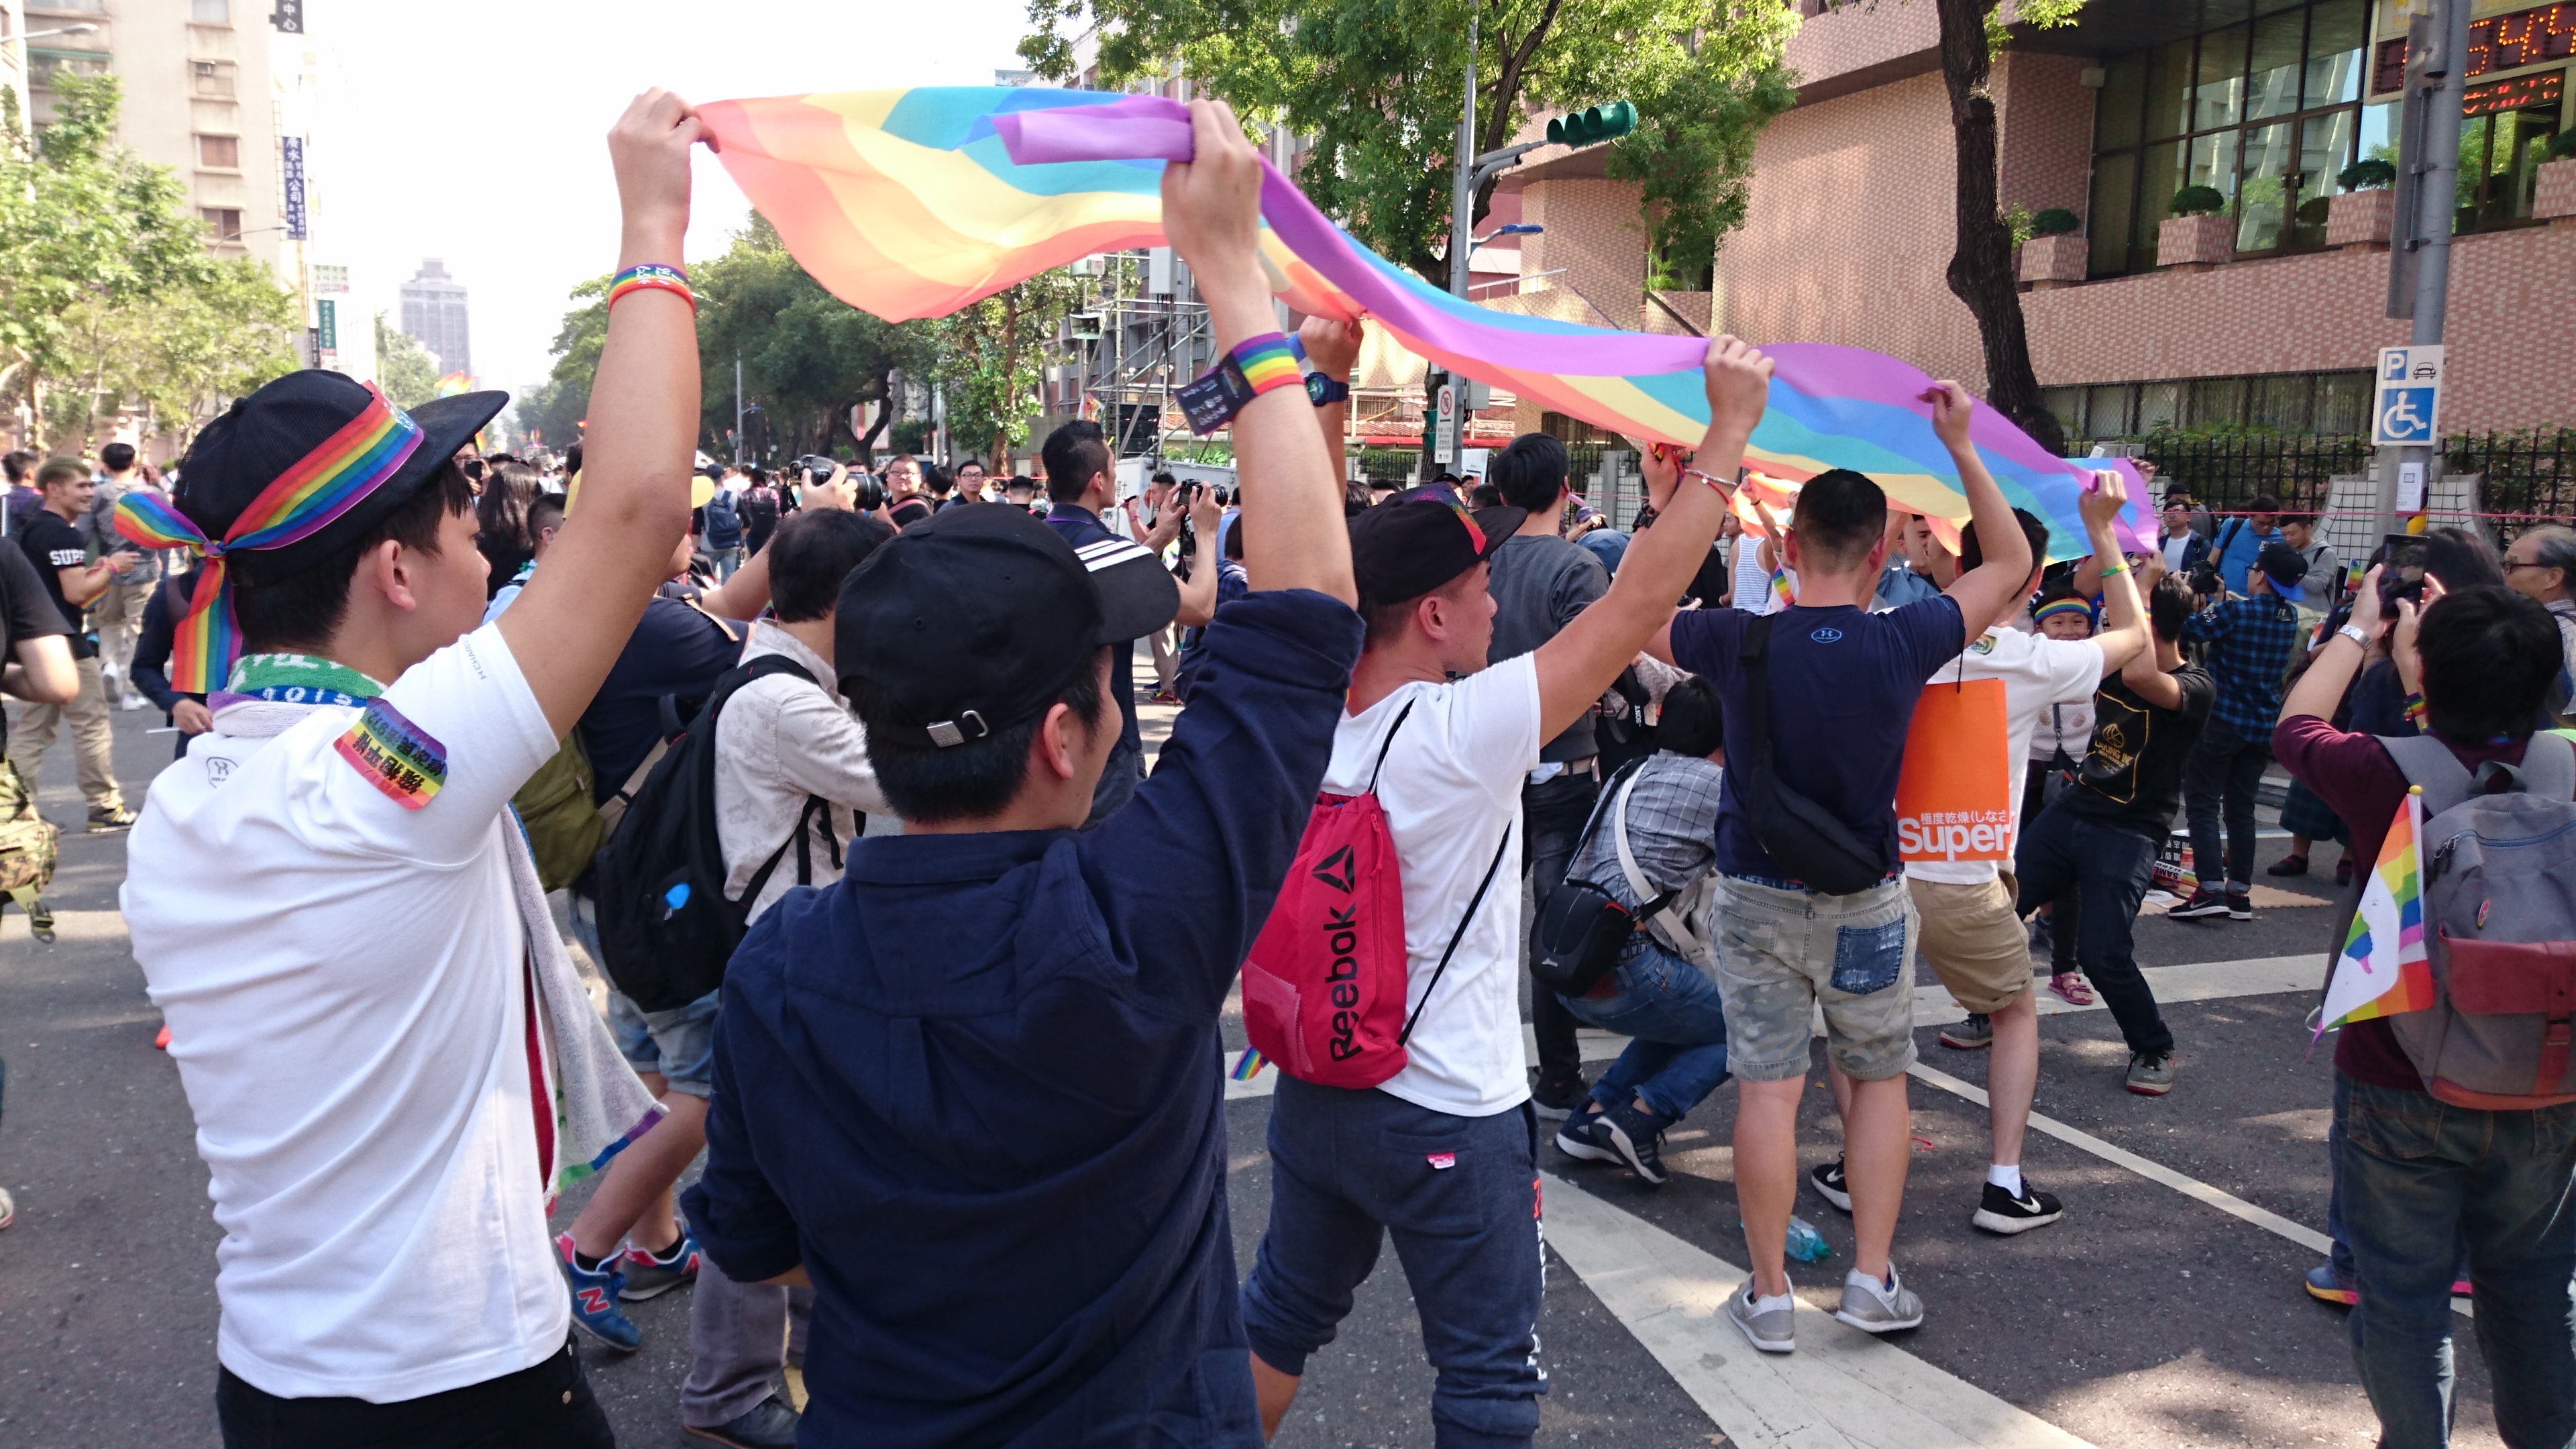 Read more about the article 什麼是酷兒 (Queer)？從歷史認識同志運動起源